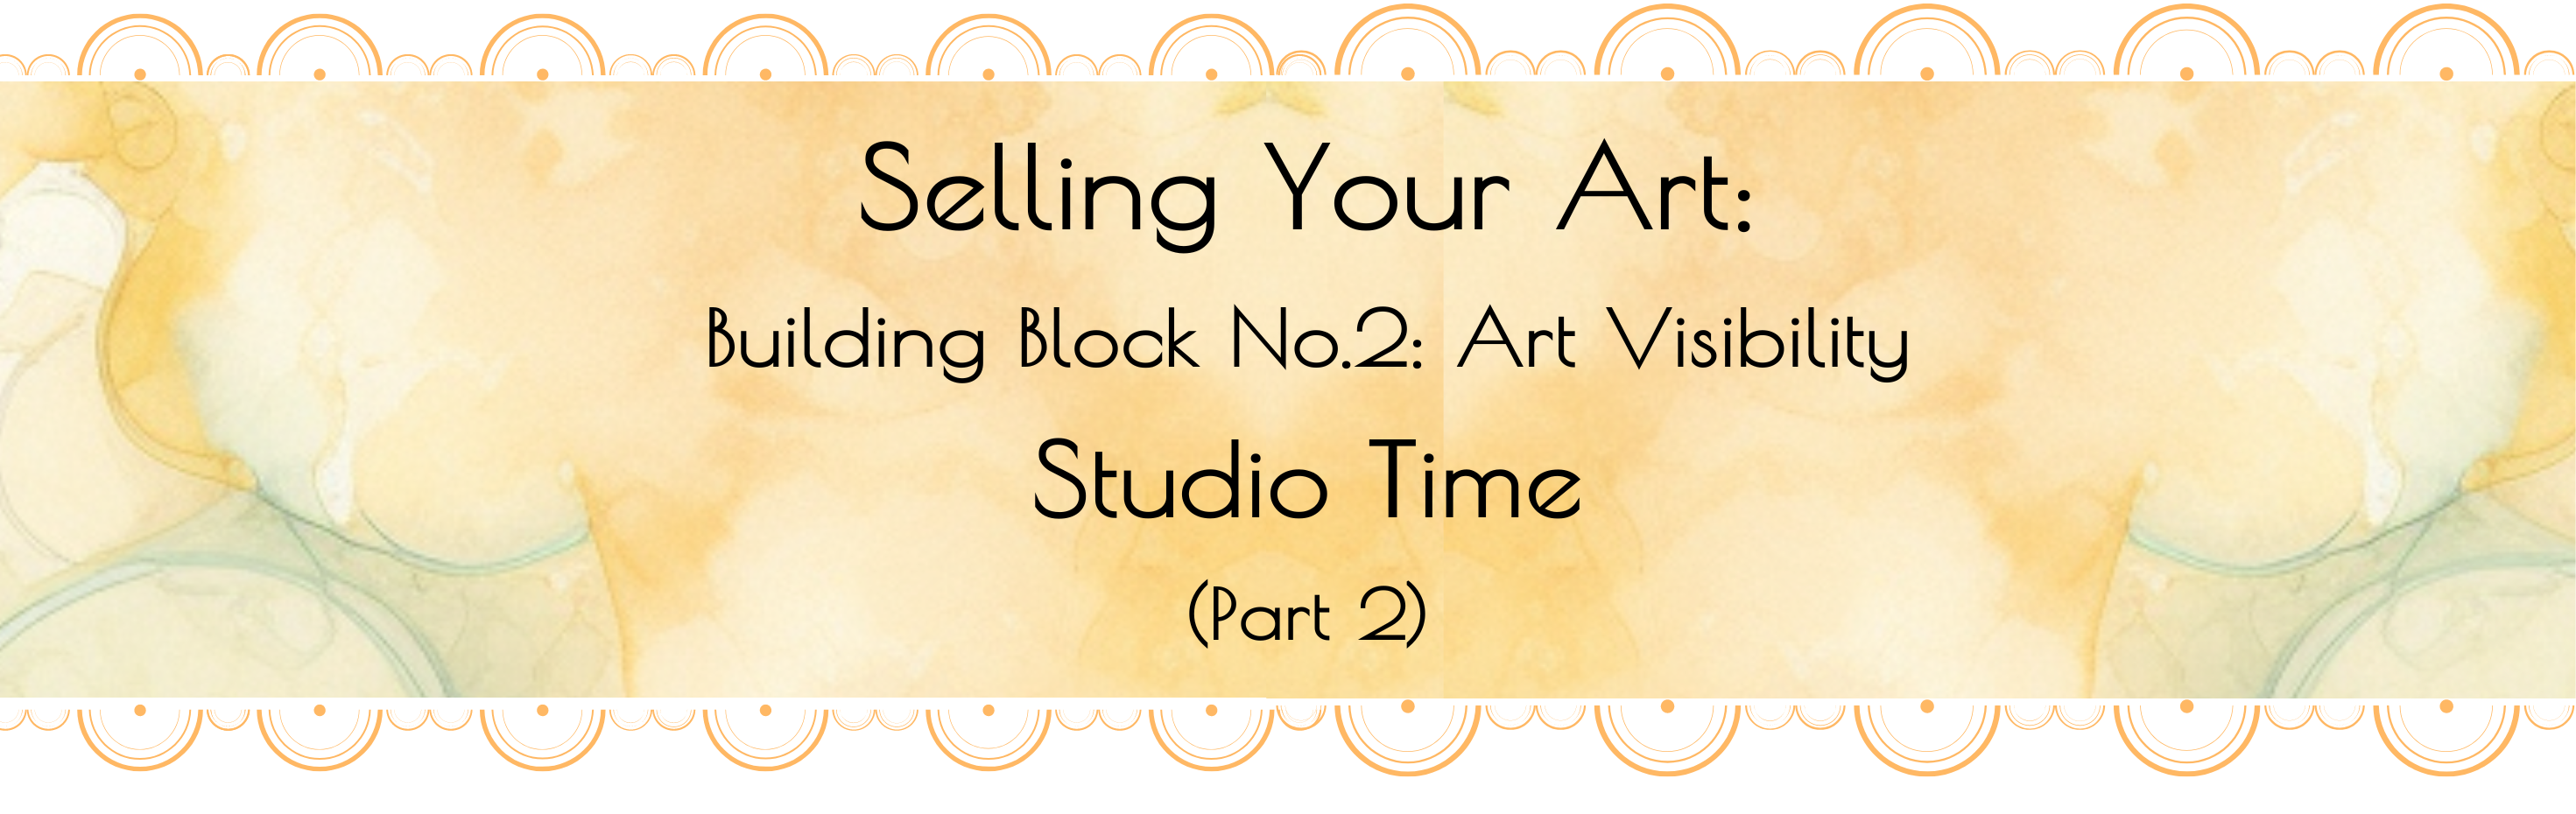 Selling Your Art: Building Block No.2: Visibility Studio Time (Part 3) Selling Your Art Building Block No.2 Visibility Studio Time Part 2